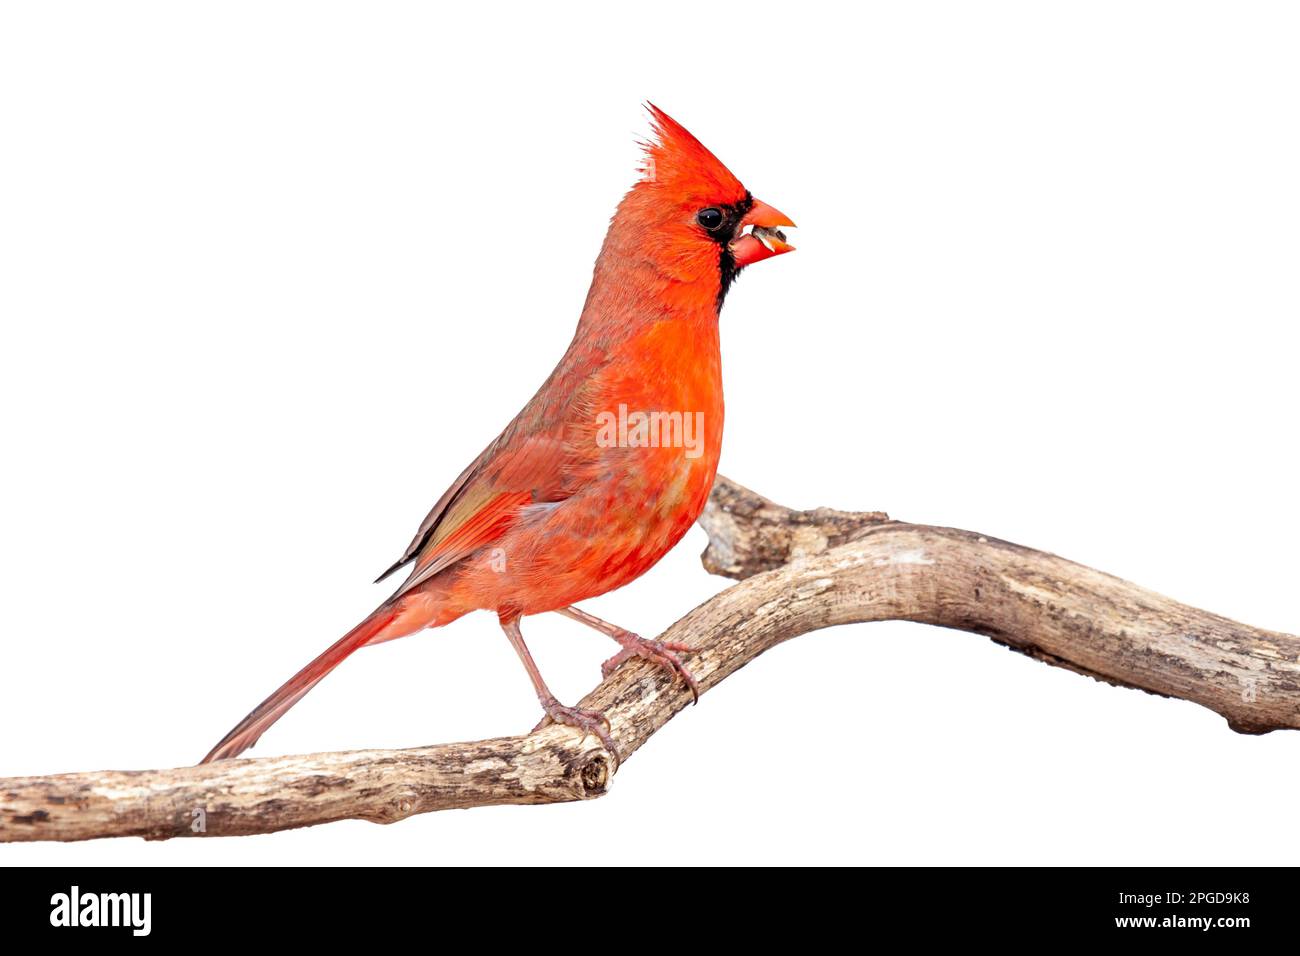 With its crest up, a cardinal eats a sunflower seed while perched on a branch. White background Stock Photo